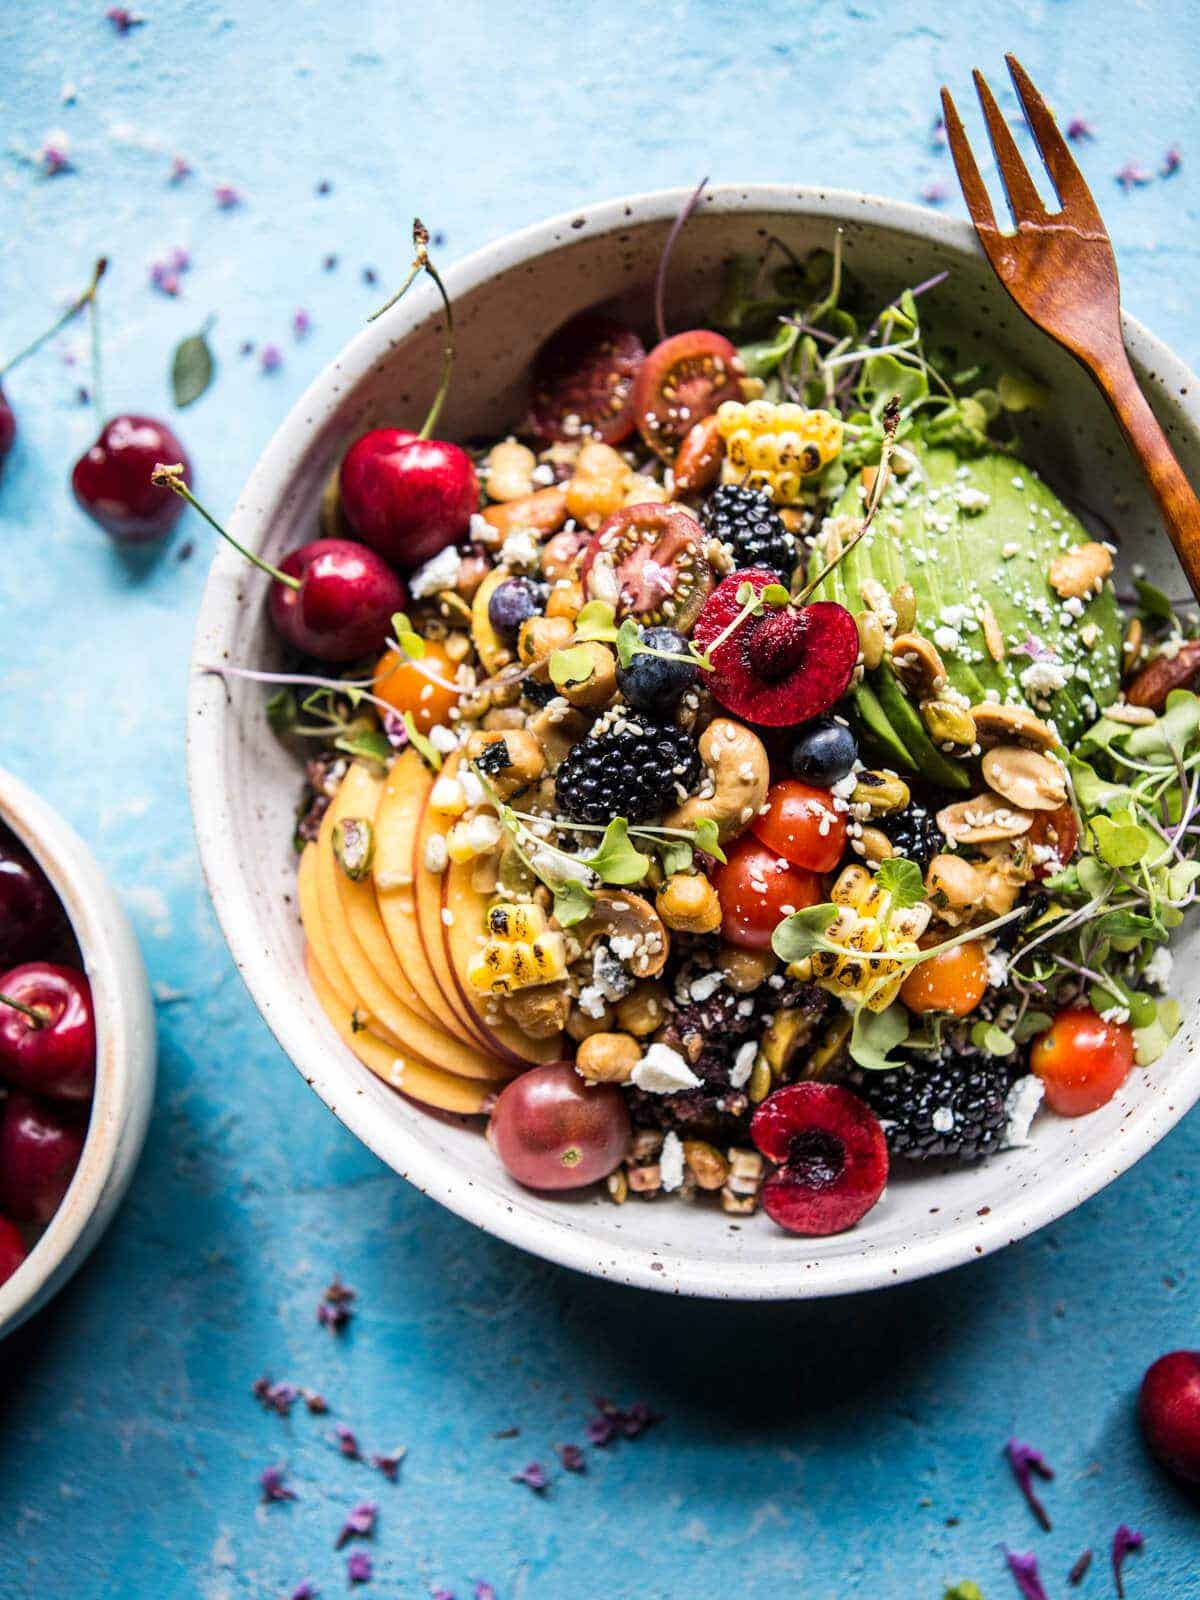 Ditch the Greens: 10 Fruit Salads We’d Rather Eat Instead